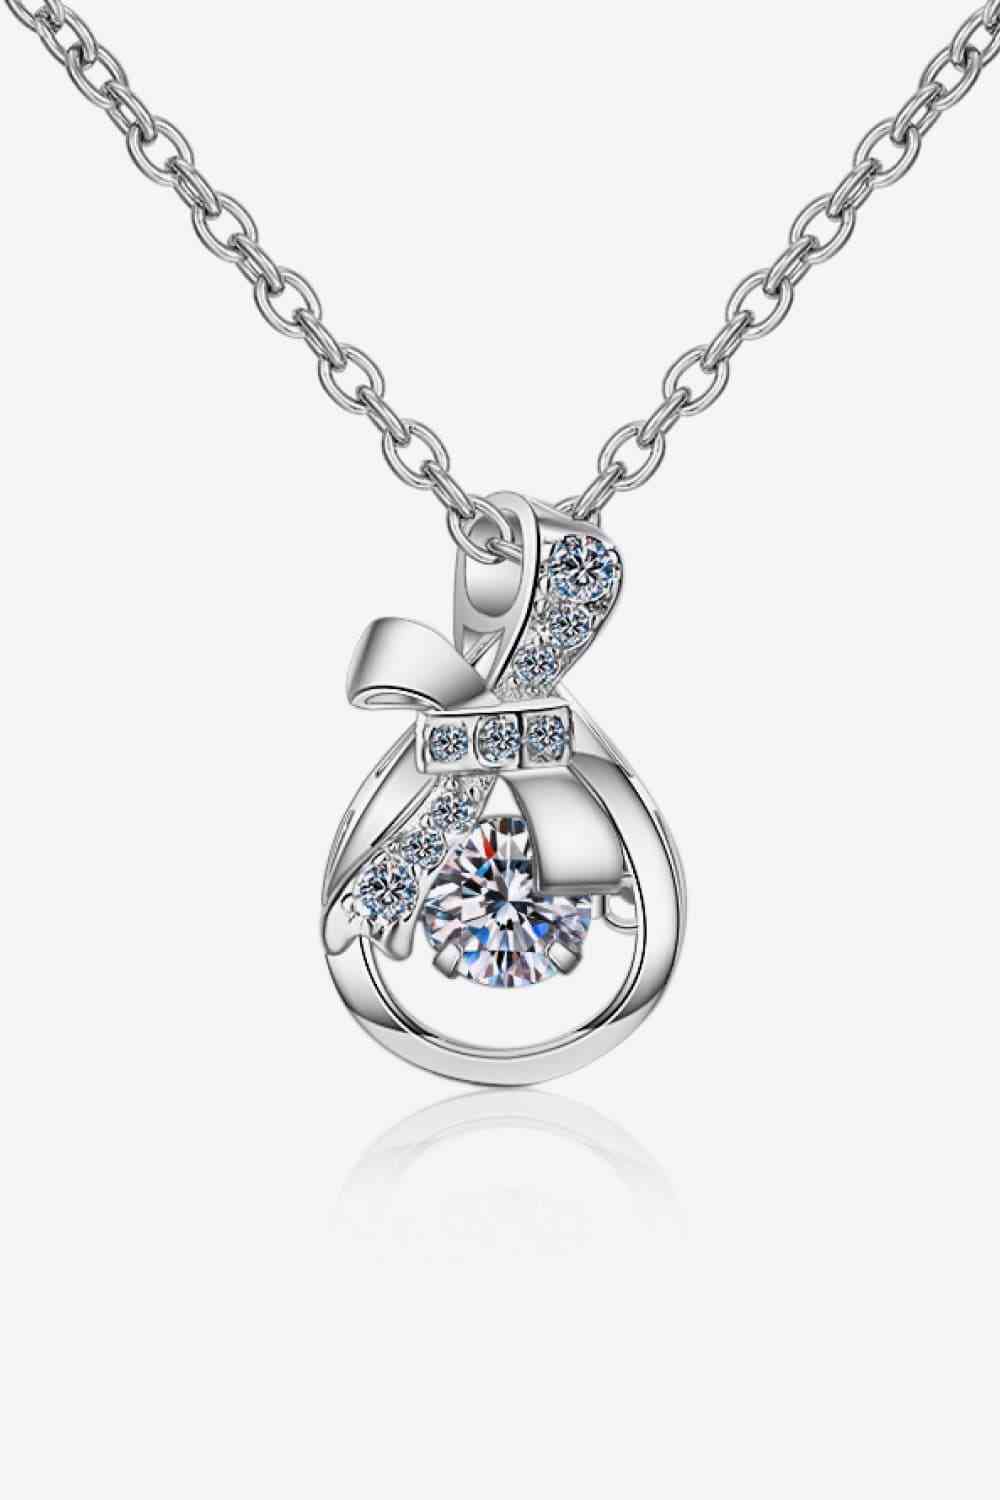 PREORDER- 1 Carat Moissanite 925 Sterling Silver Necklace